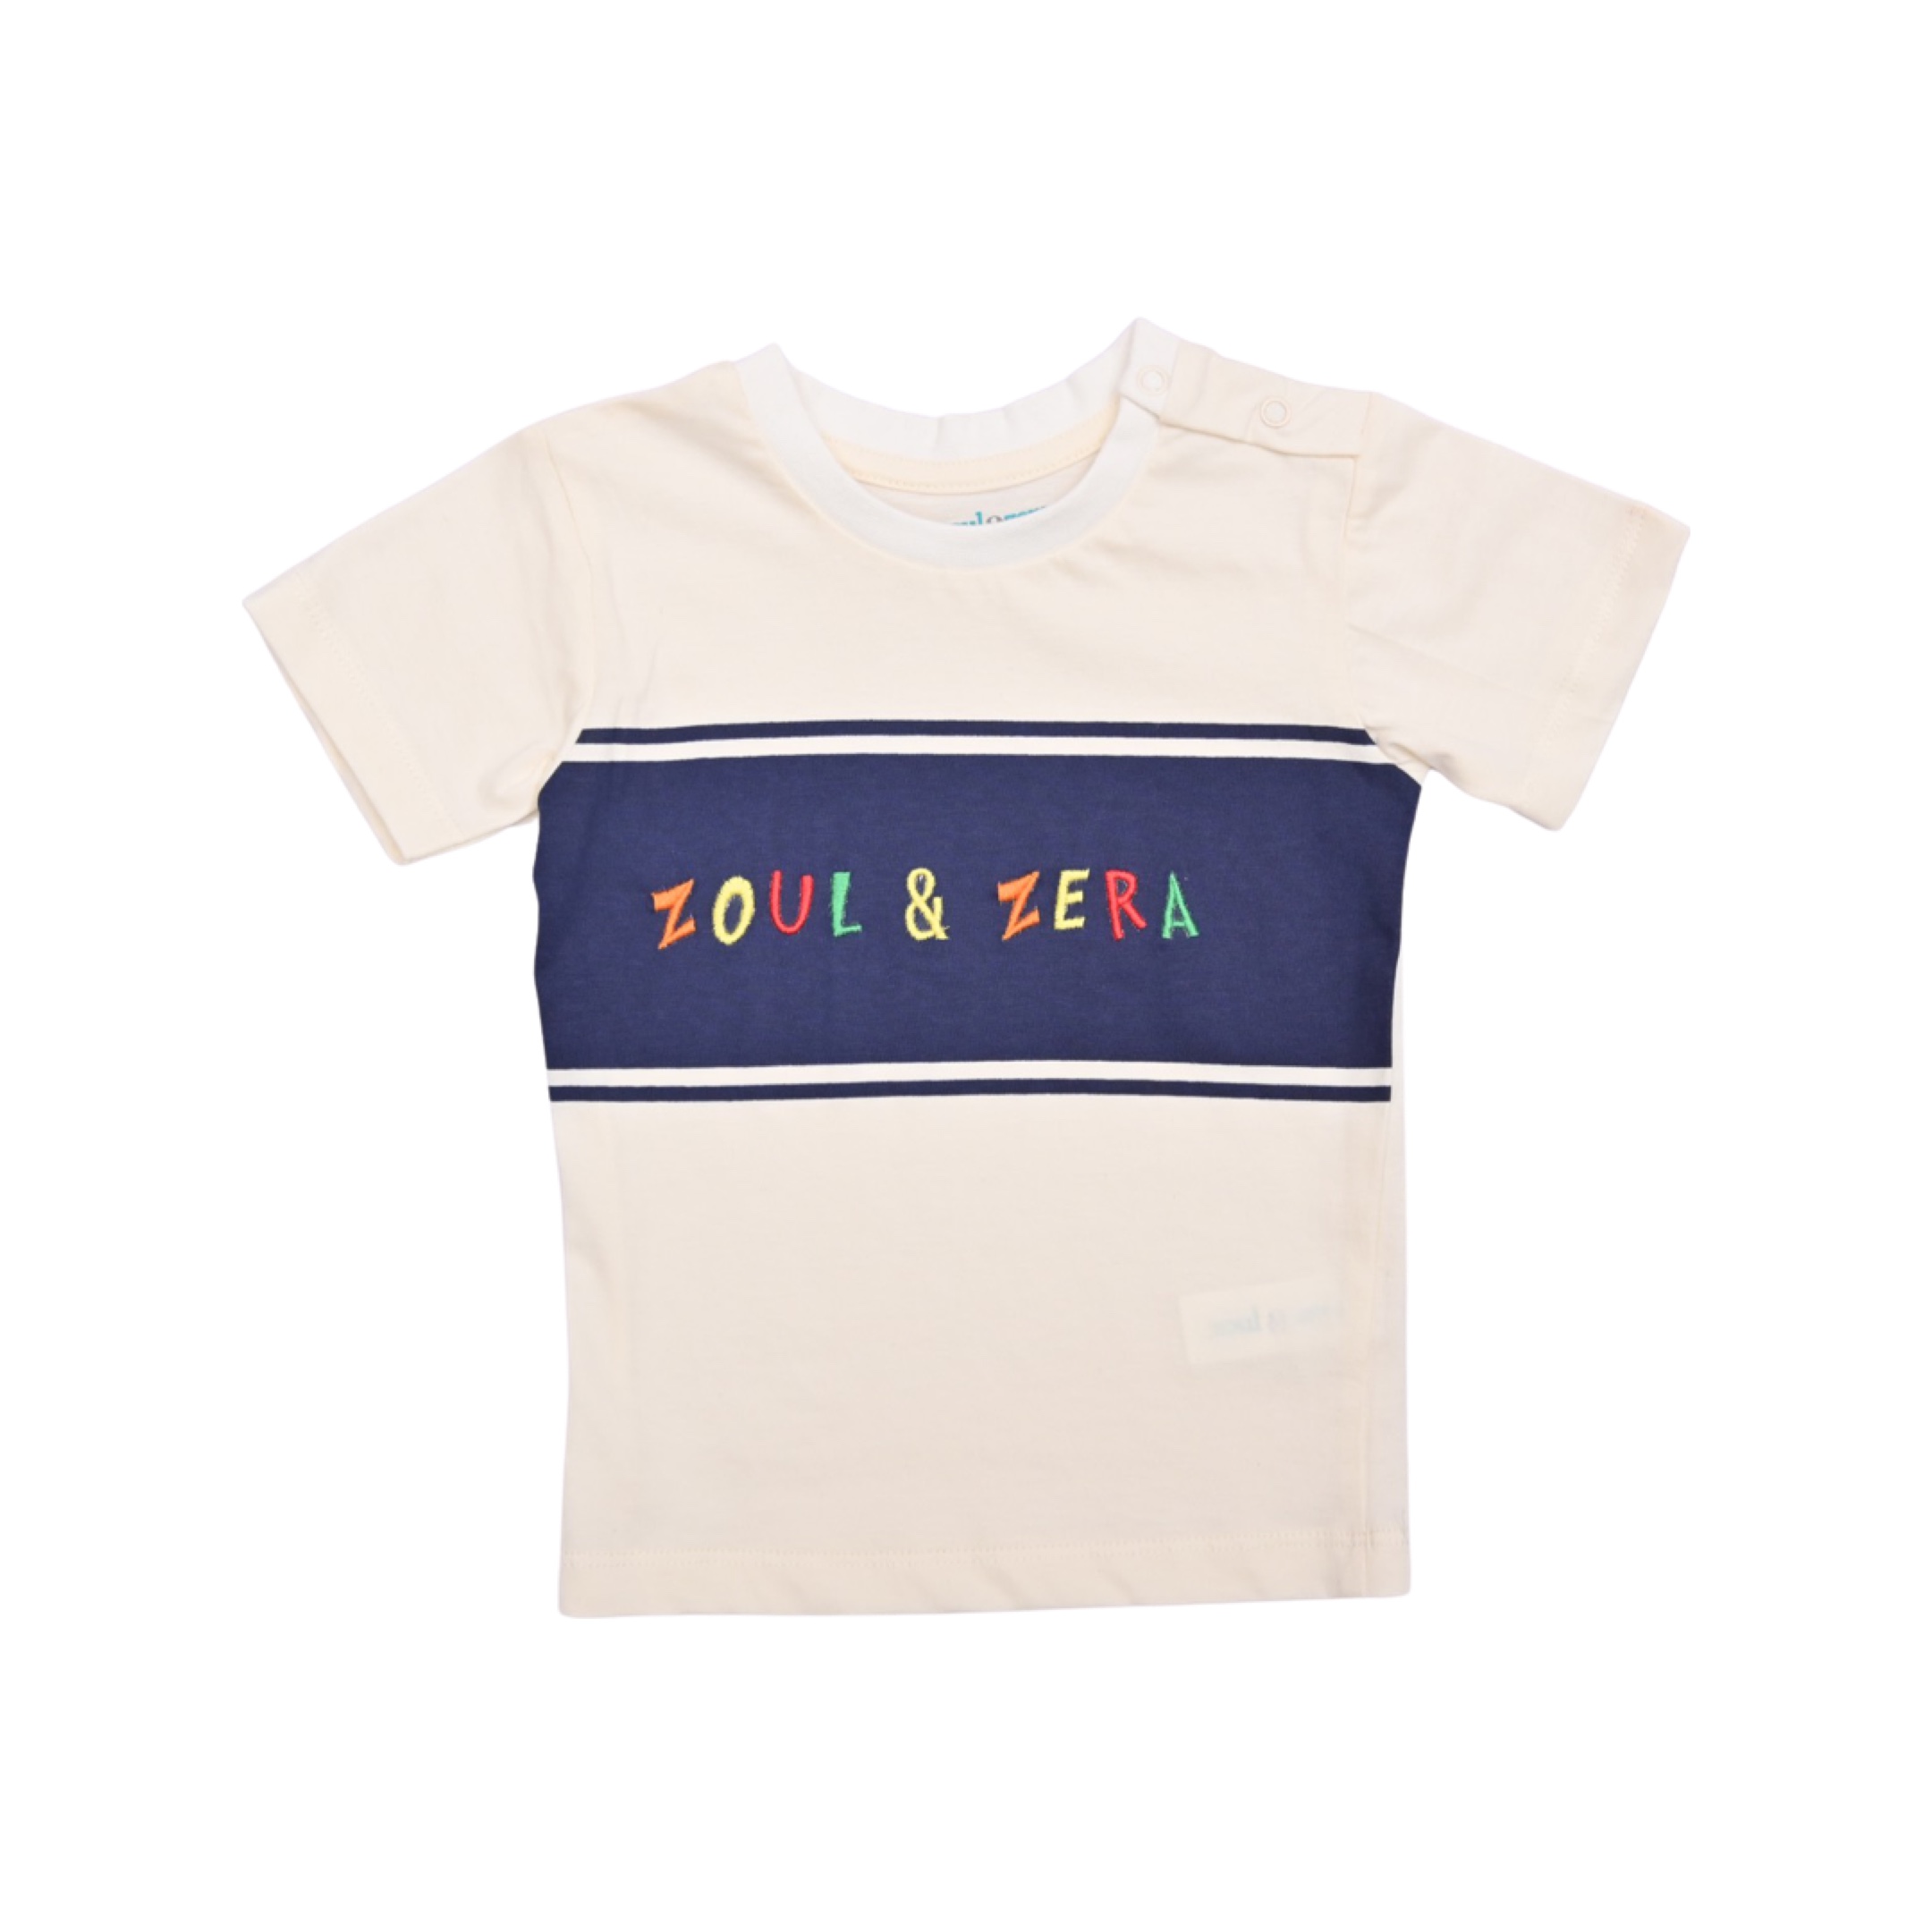 Zoul & Zera Round Zoul&Zera Embroidered Casual Tees for Boys